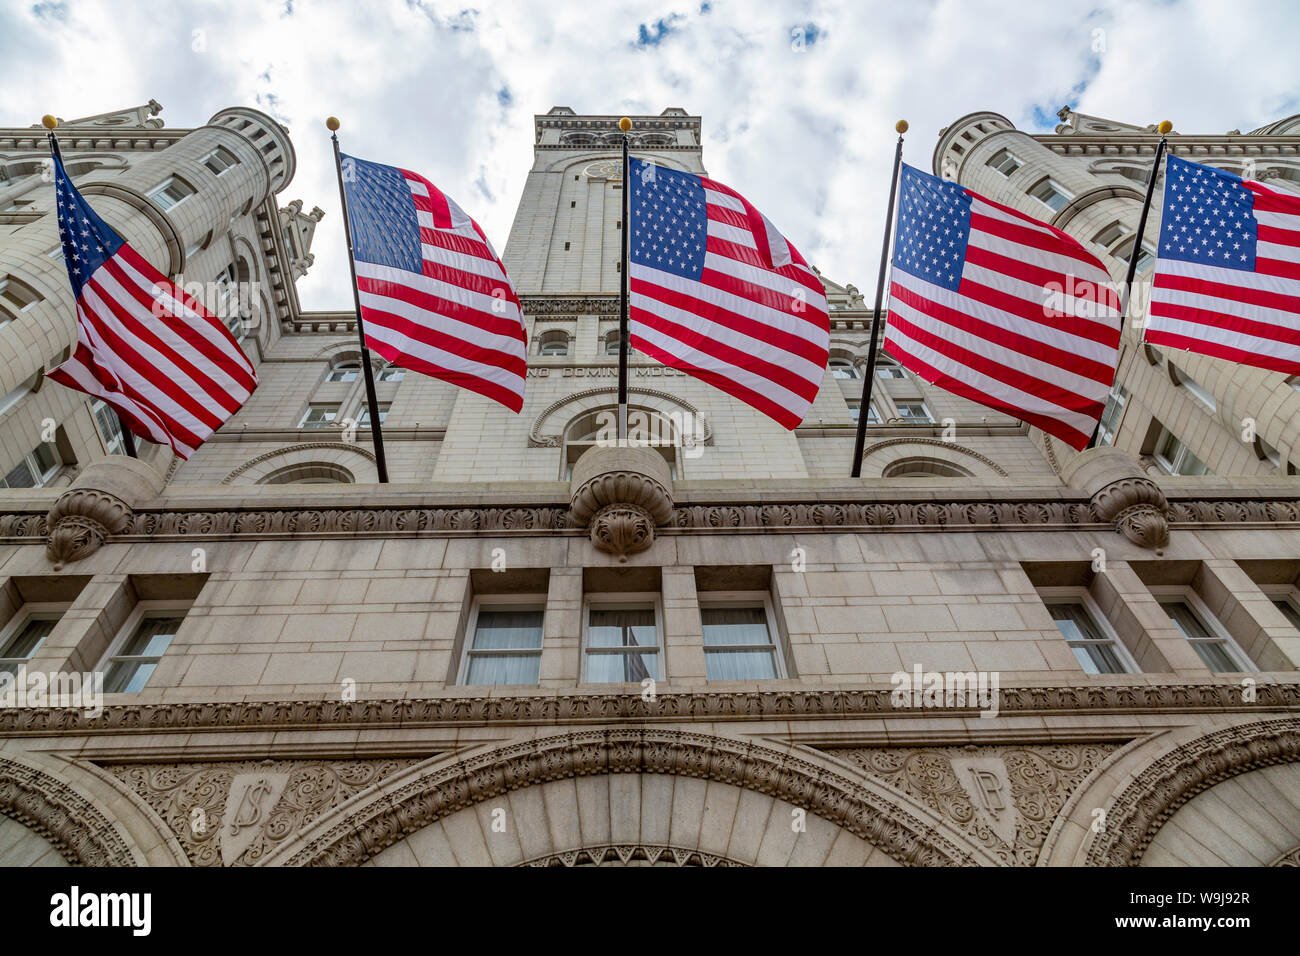 View of US flags in front of former Old Post Office Pavilion, Washington DC, District of Columbia, United States of America Stock Photo